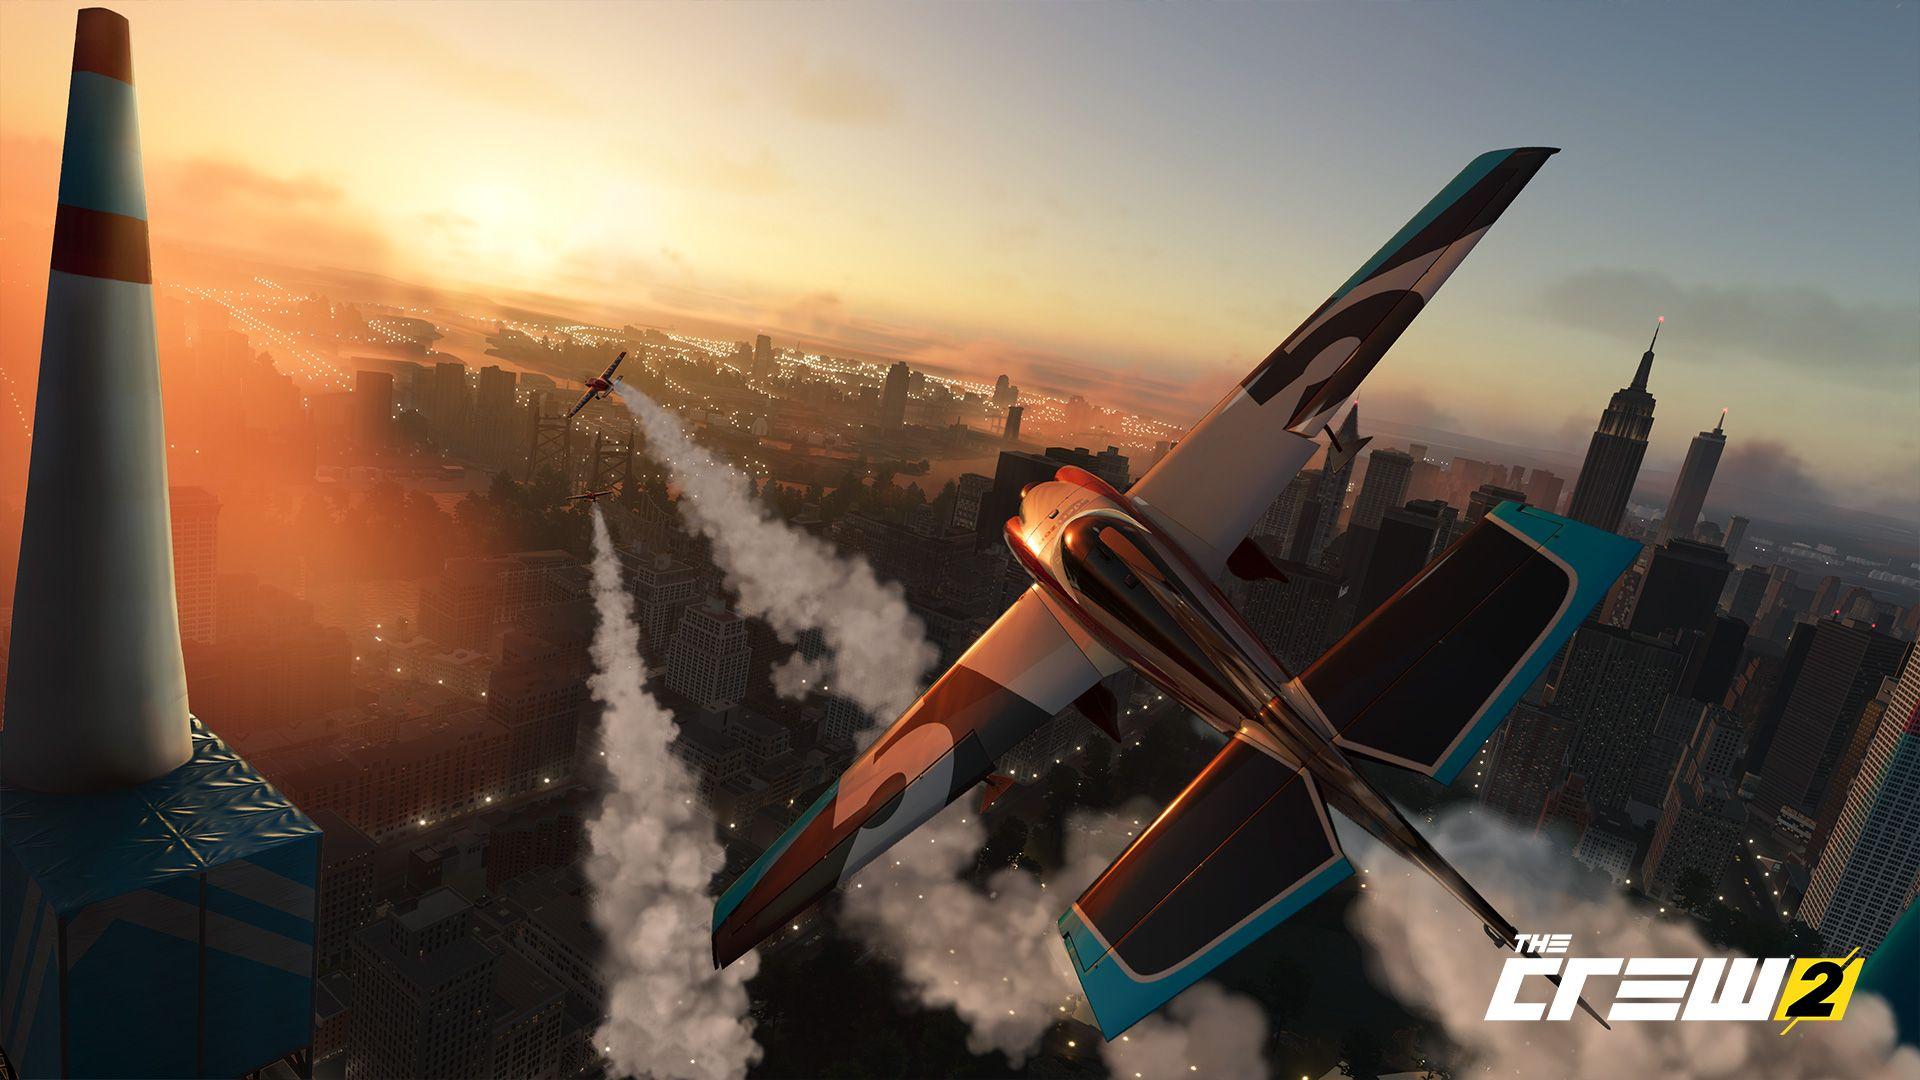 Ubisoft Reveals The Crew 2; Will Include Cars, Bikes, Boats & Planes